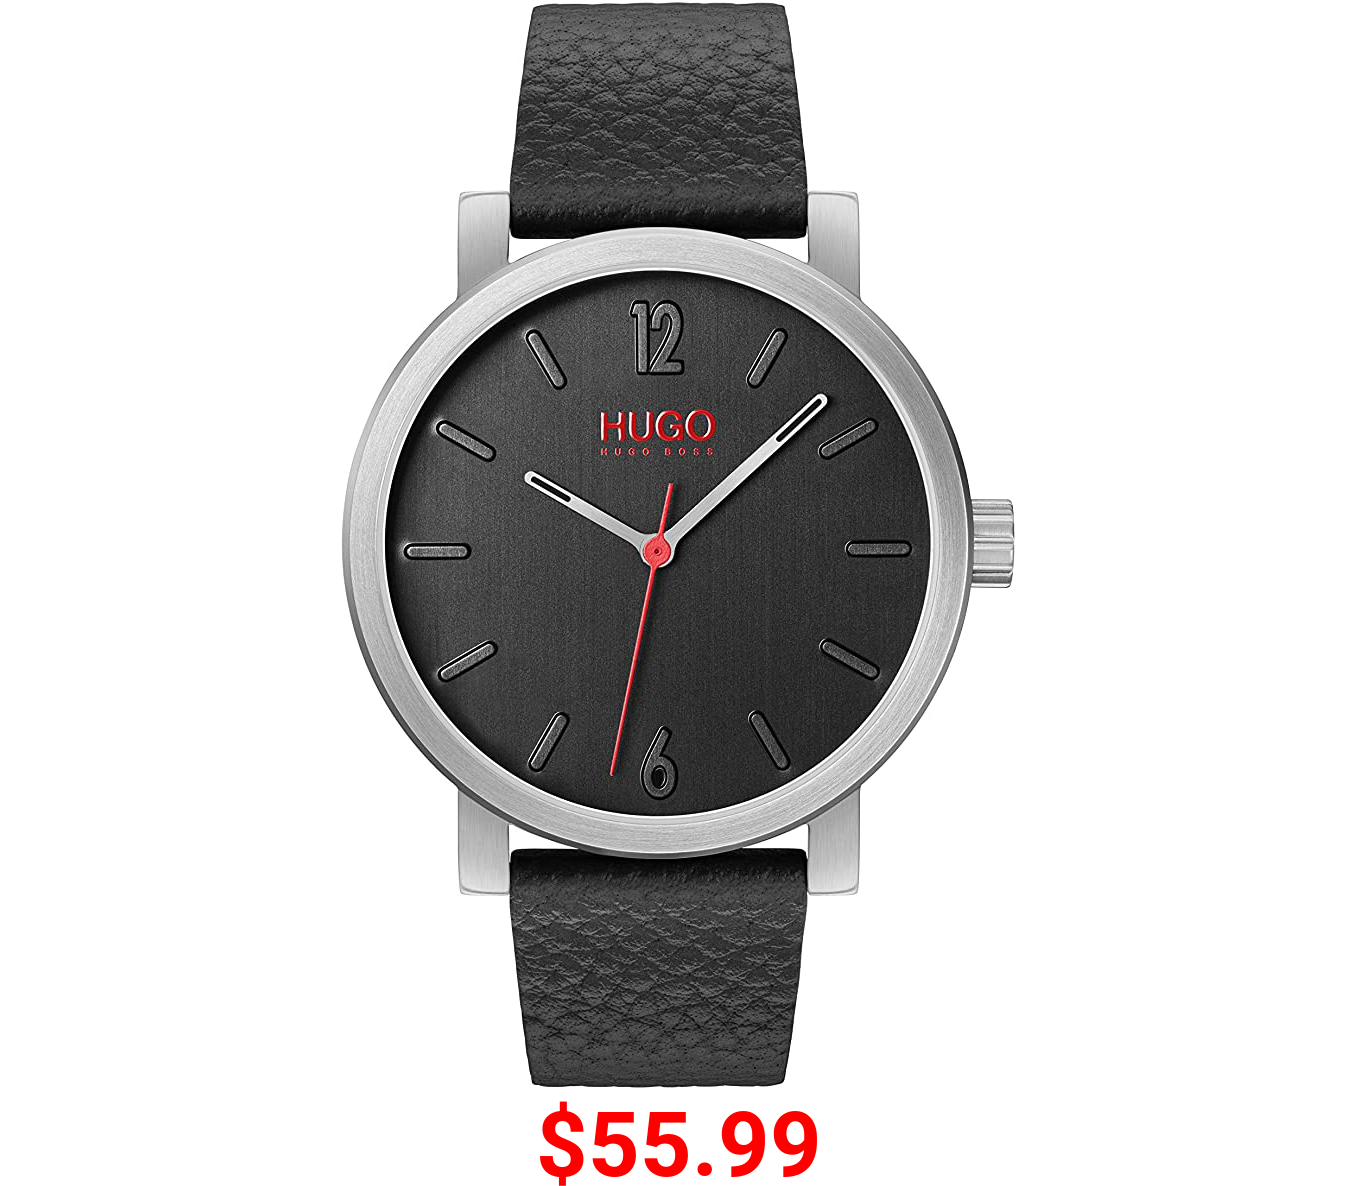 HUGO by Hugo Boss Men's Stainless Steel Quartz Watch with Leather Strap, Black, 20 (Model: 1530115)